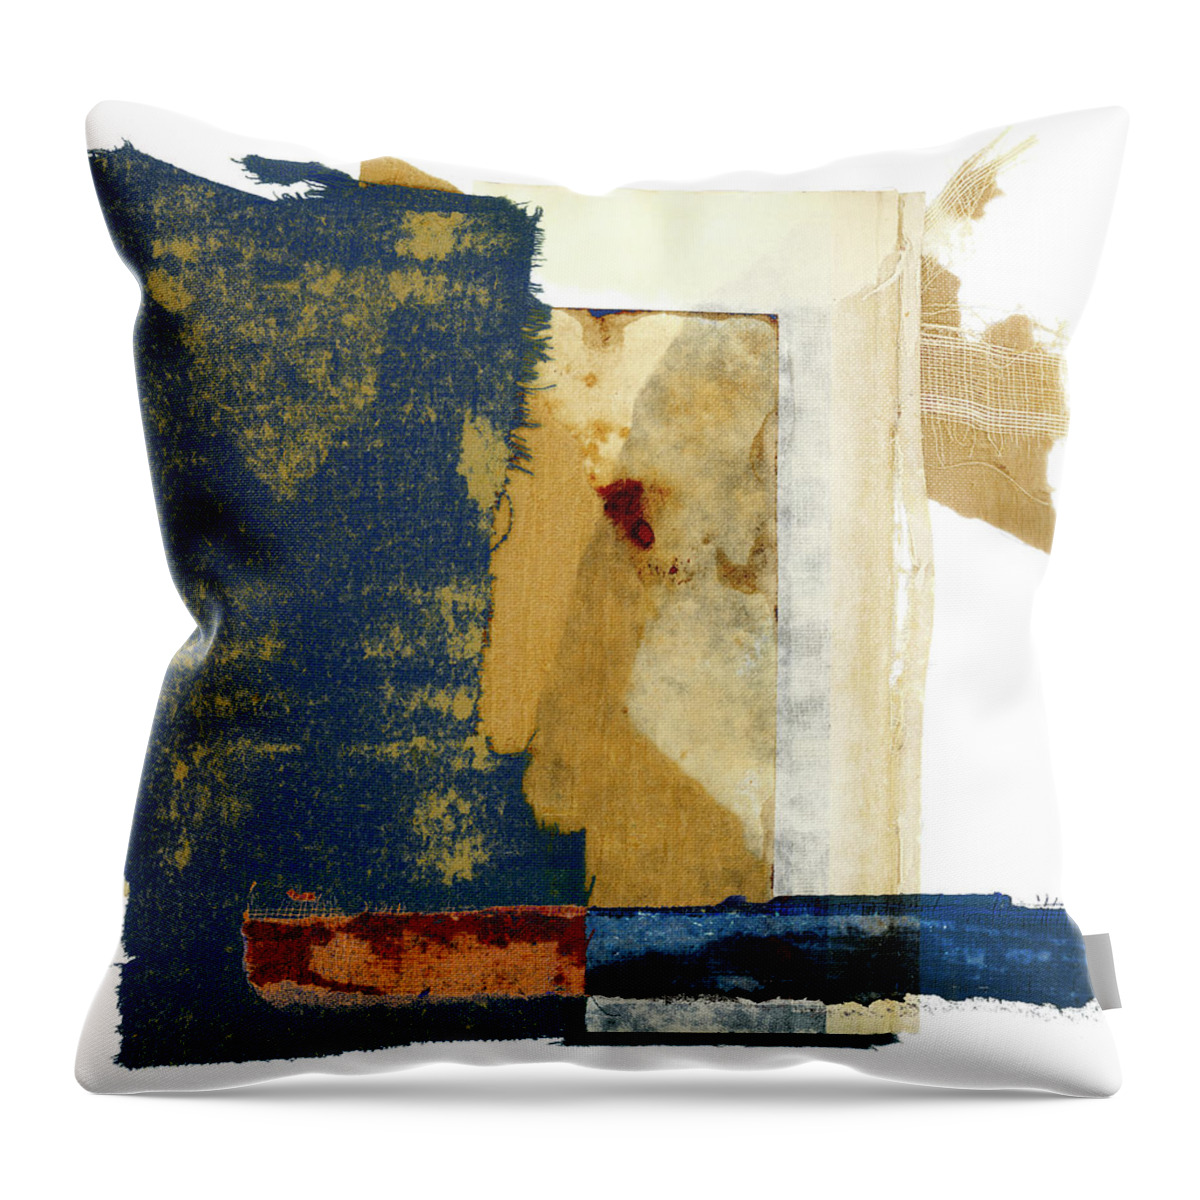 Old Books Throw Pillow featuring the mixed media Books Deconstructed 425 by Carol Leigh